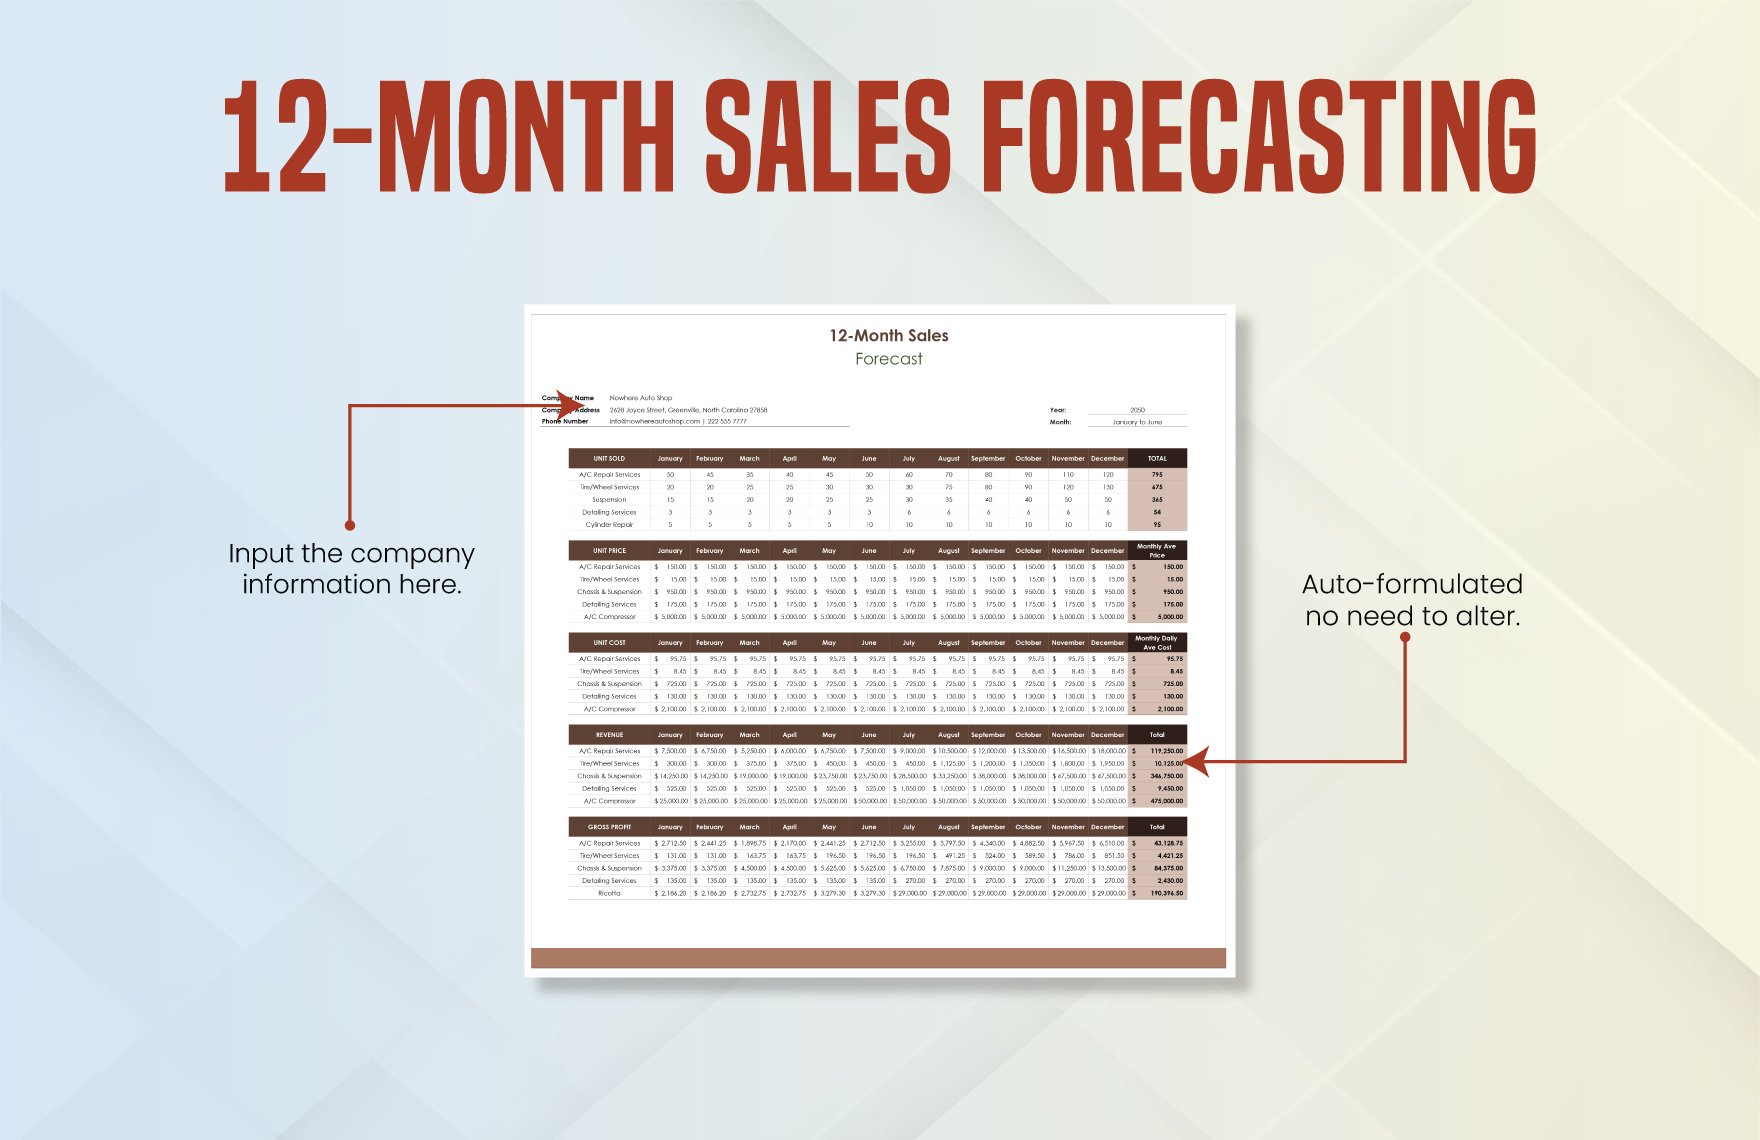 12-month Sales Forecasting Template